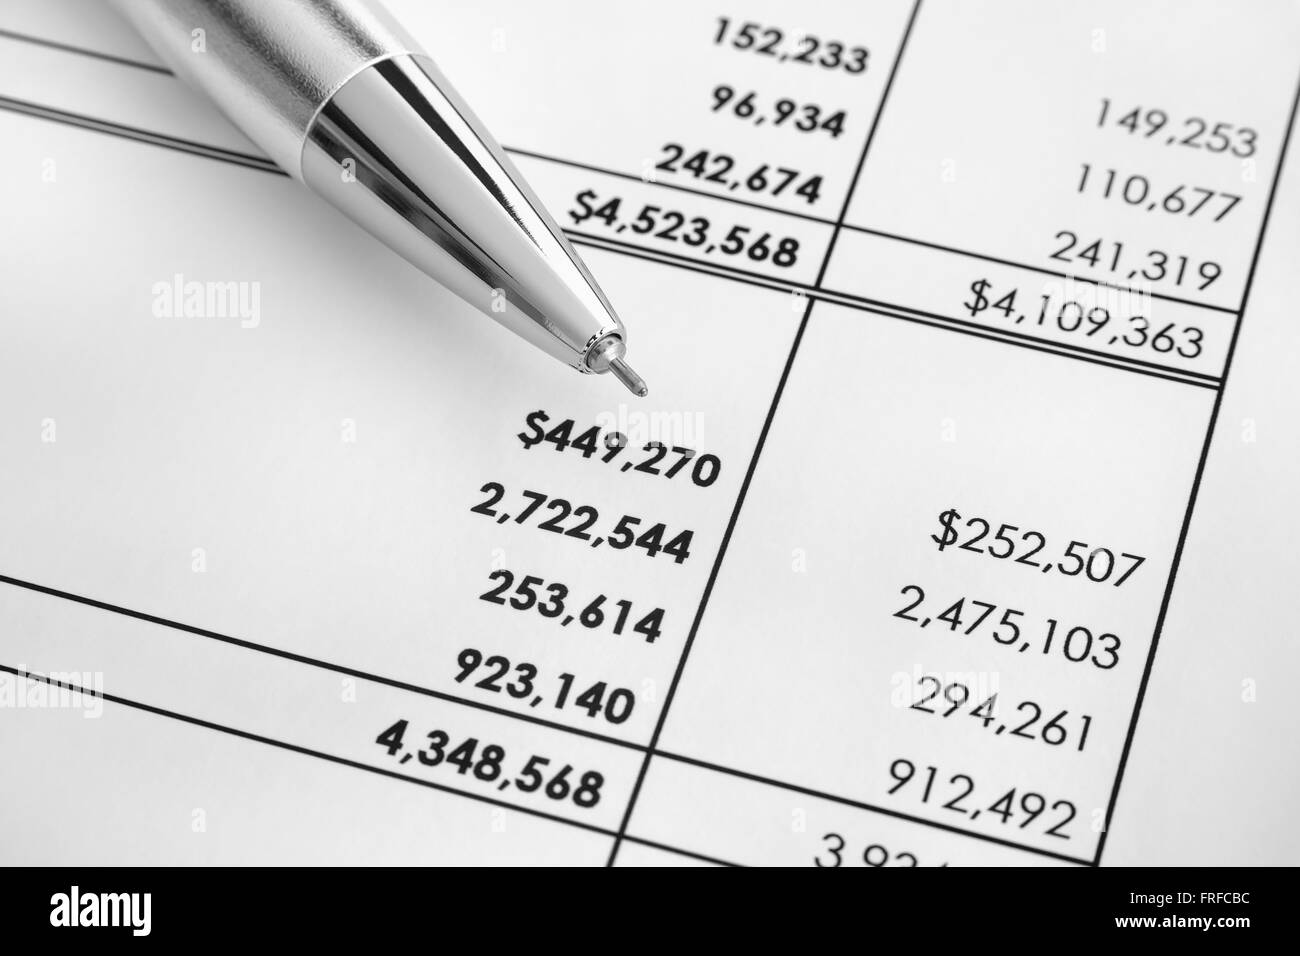 Financial statements. Ballpoint pen on financial statements. Black and white image. Close up. Stock Photo